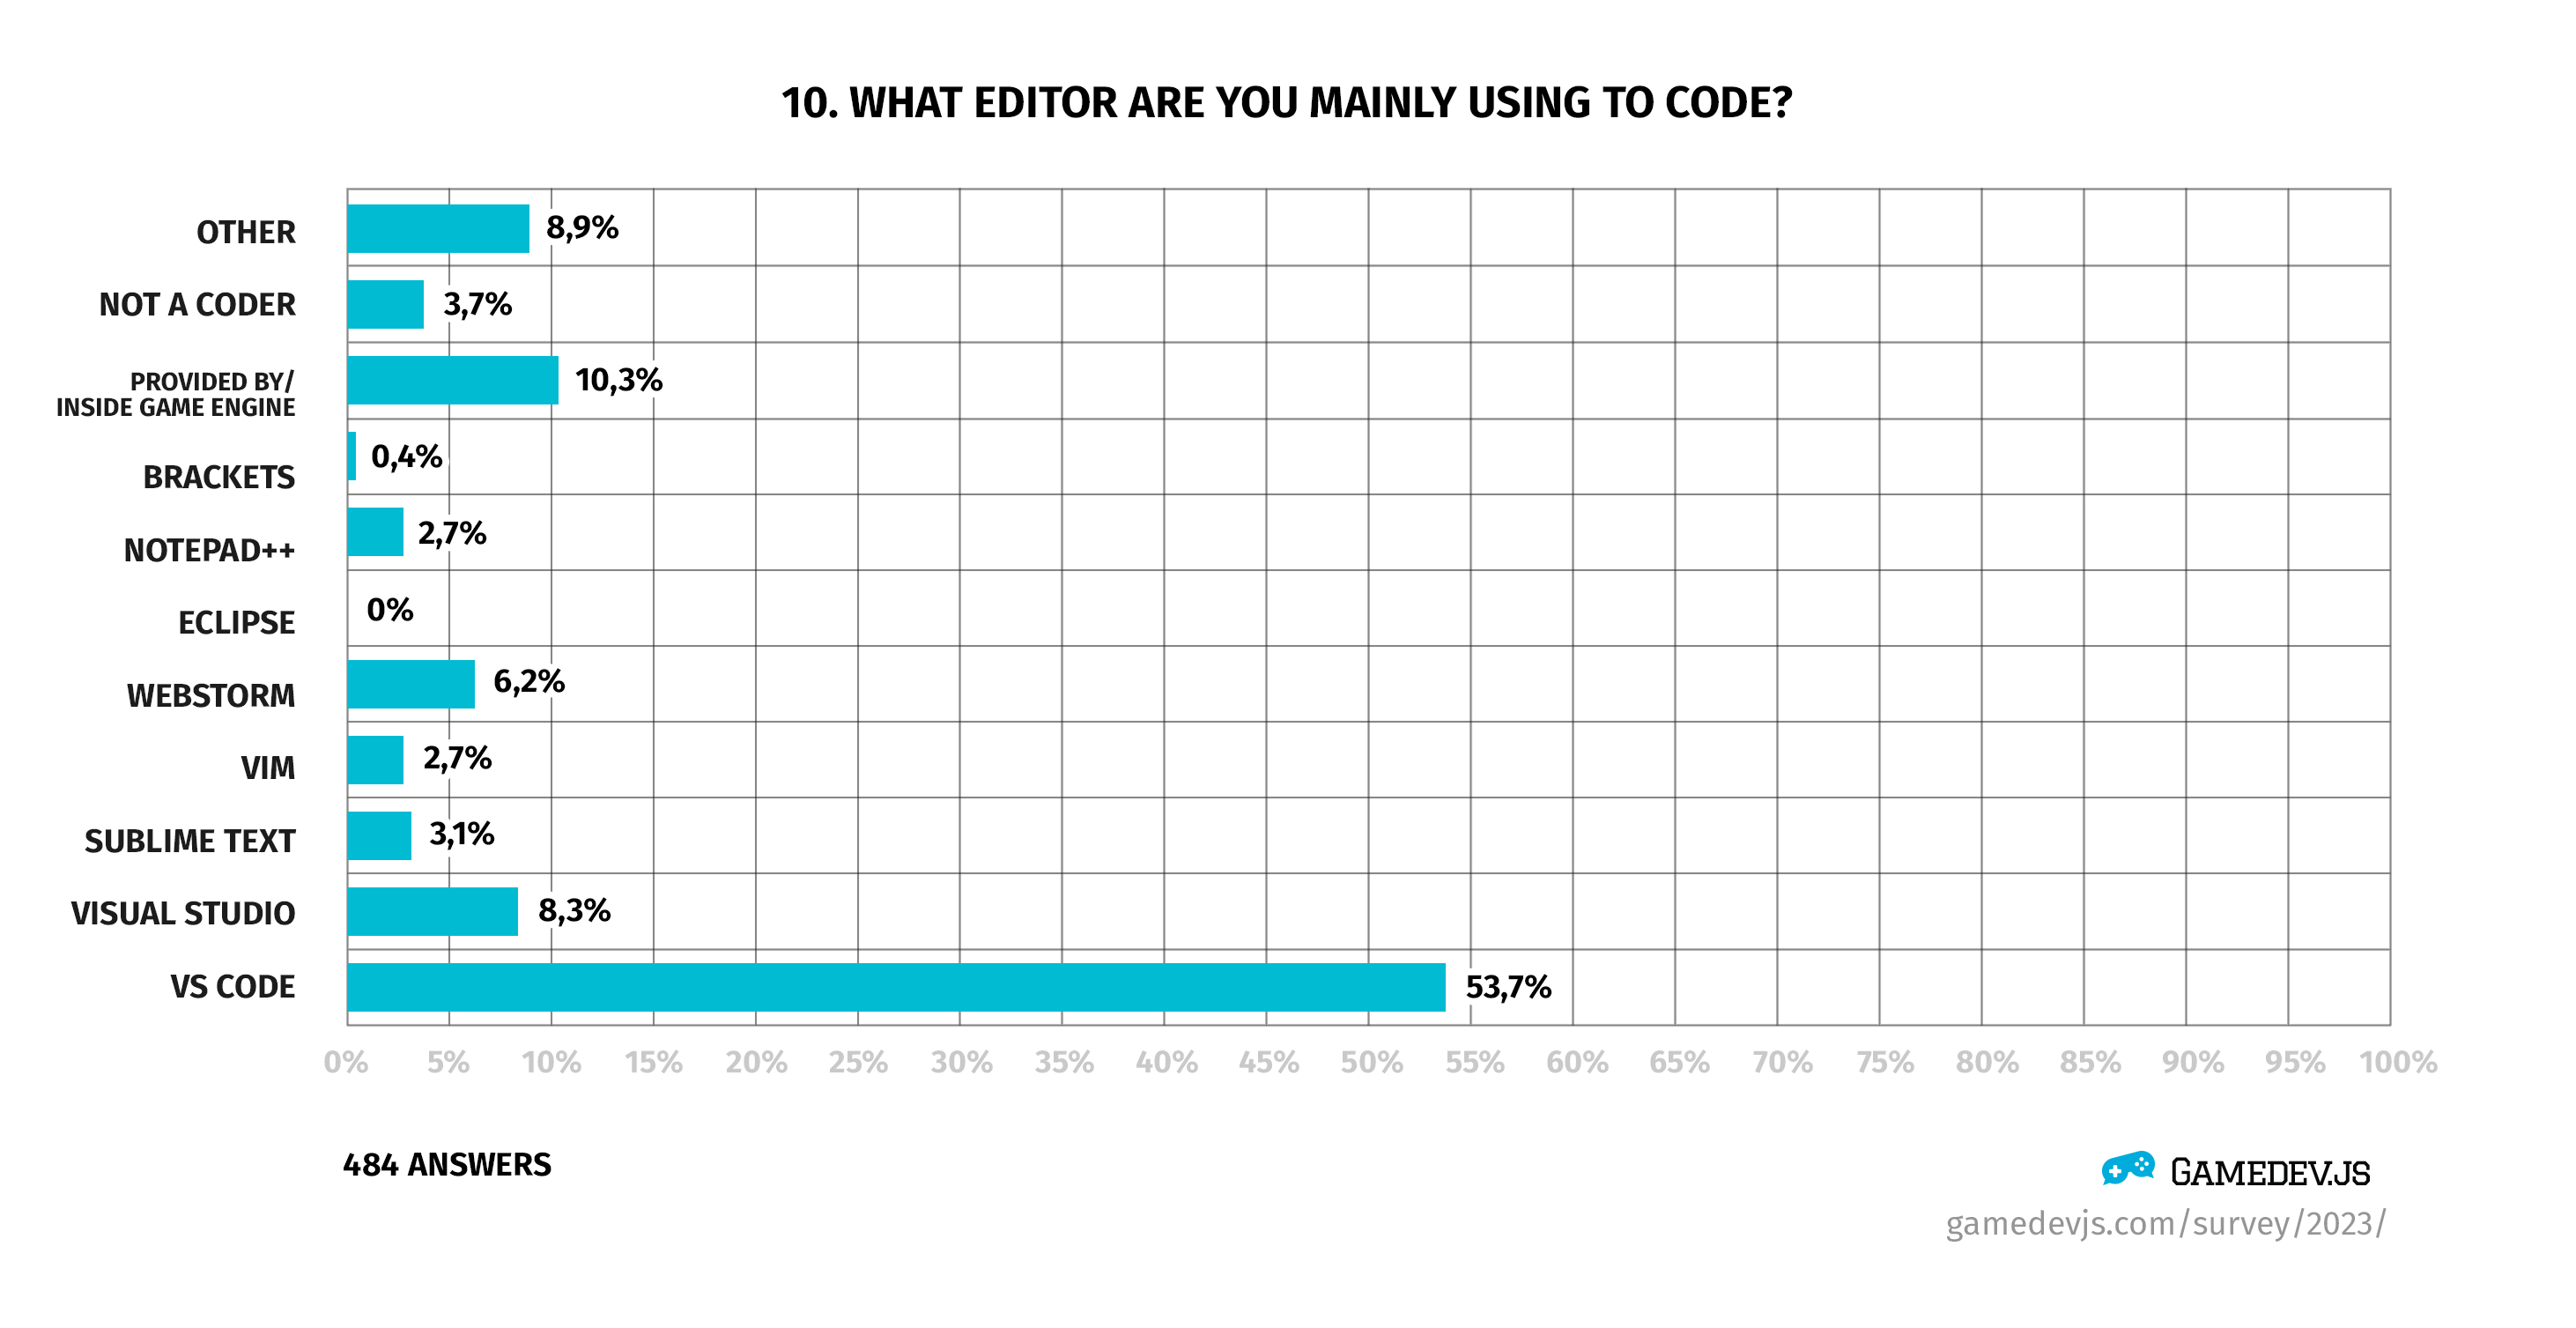 Gamedev.js Survey 2023 - Question #10: What editor are you mainly using to code?